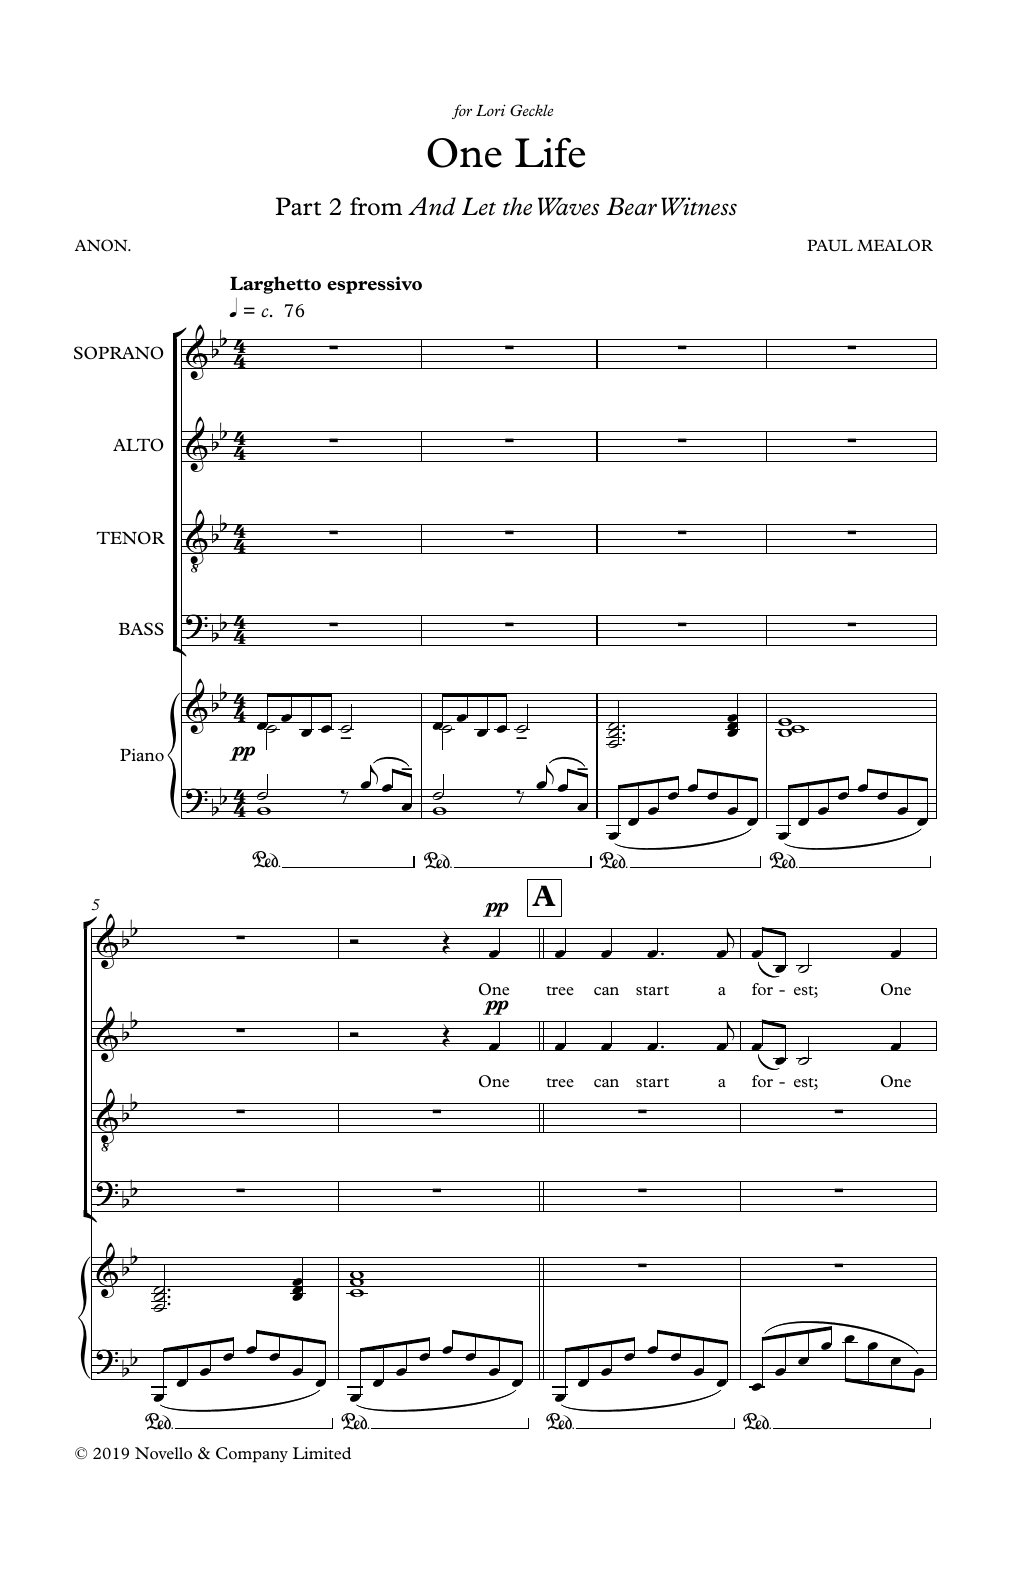 Download Paul Mealor One Life Sheet Music